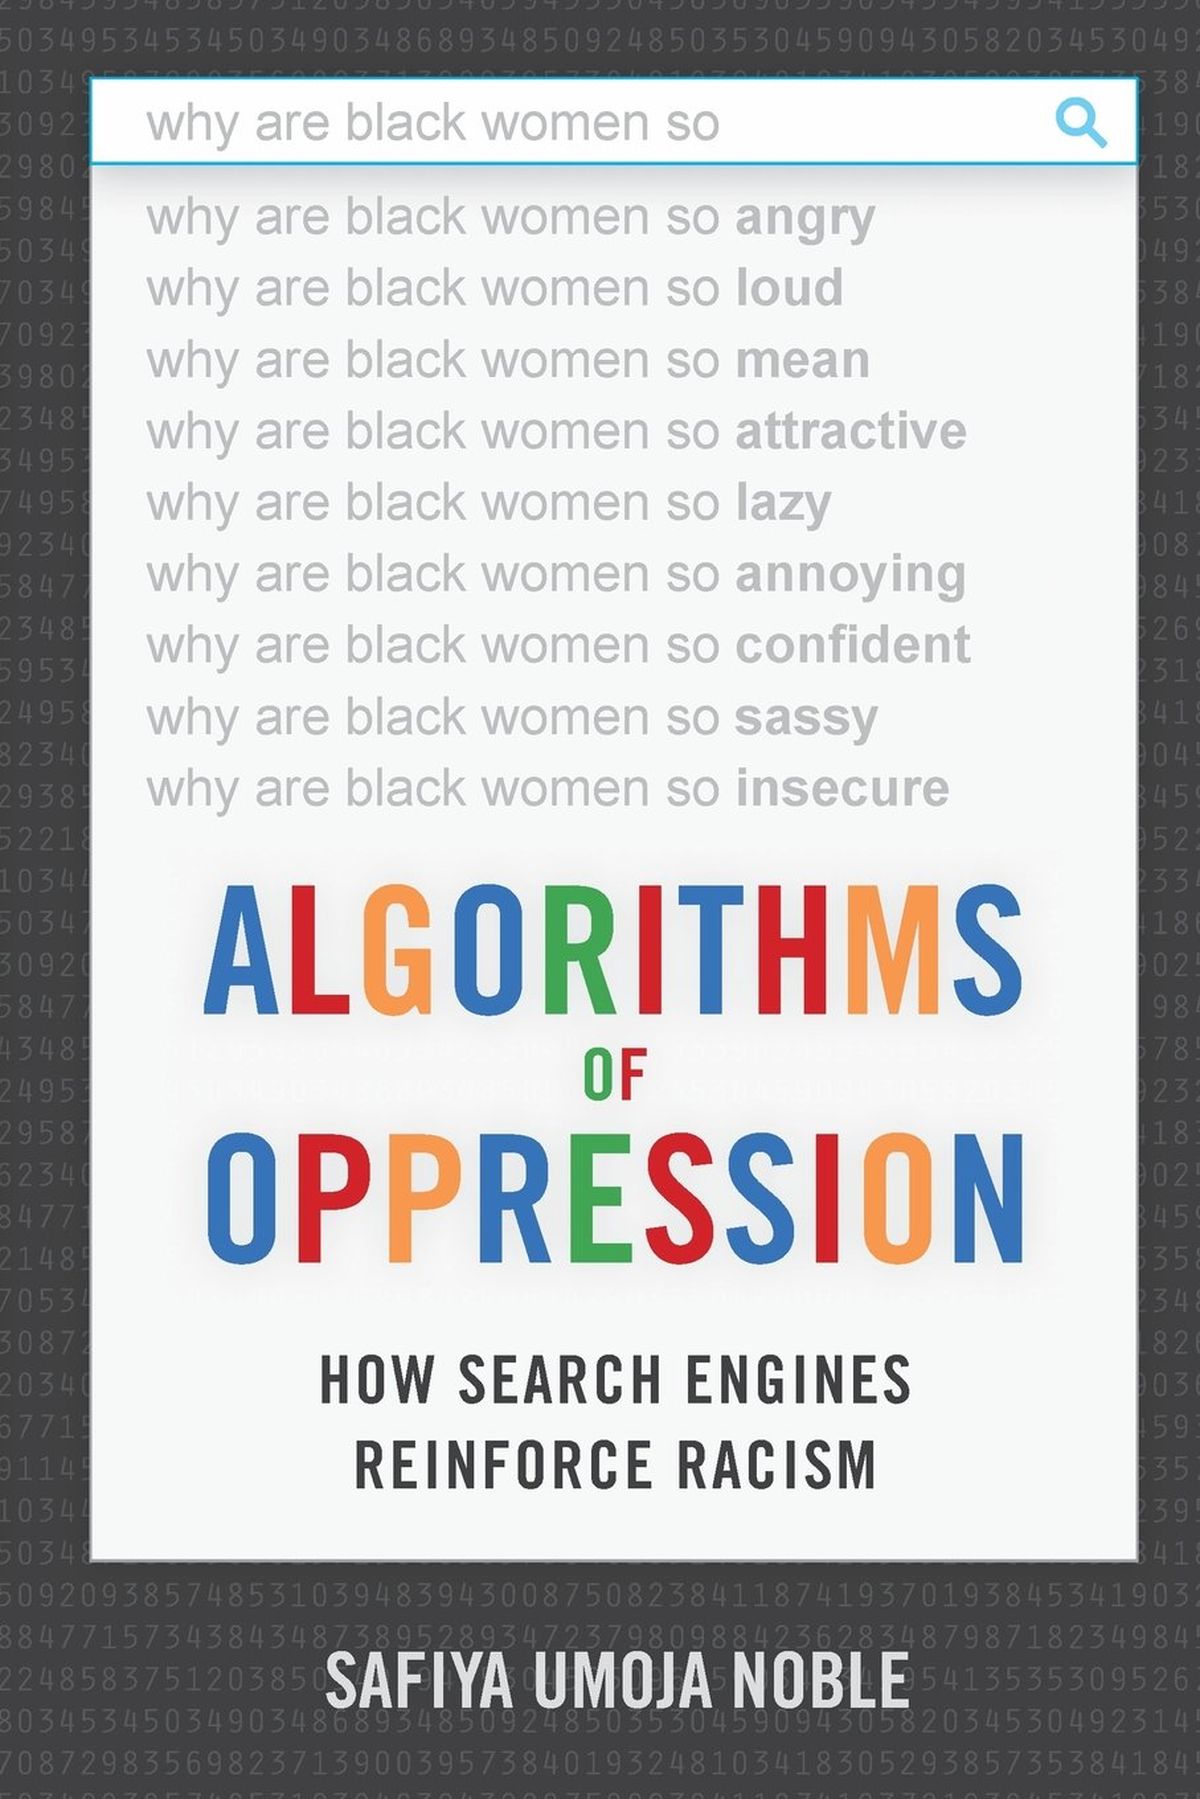 Algorithms of Oppression // How Search Engines Reinforce Racism